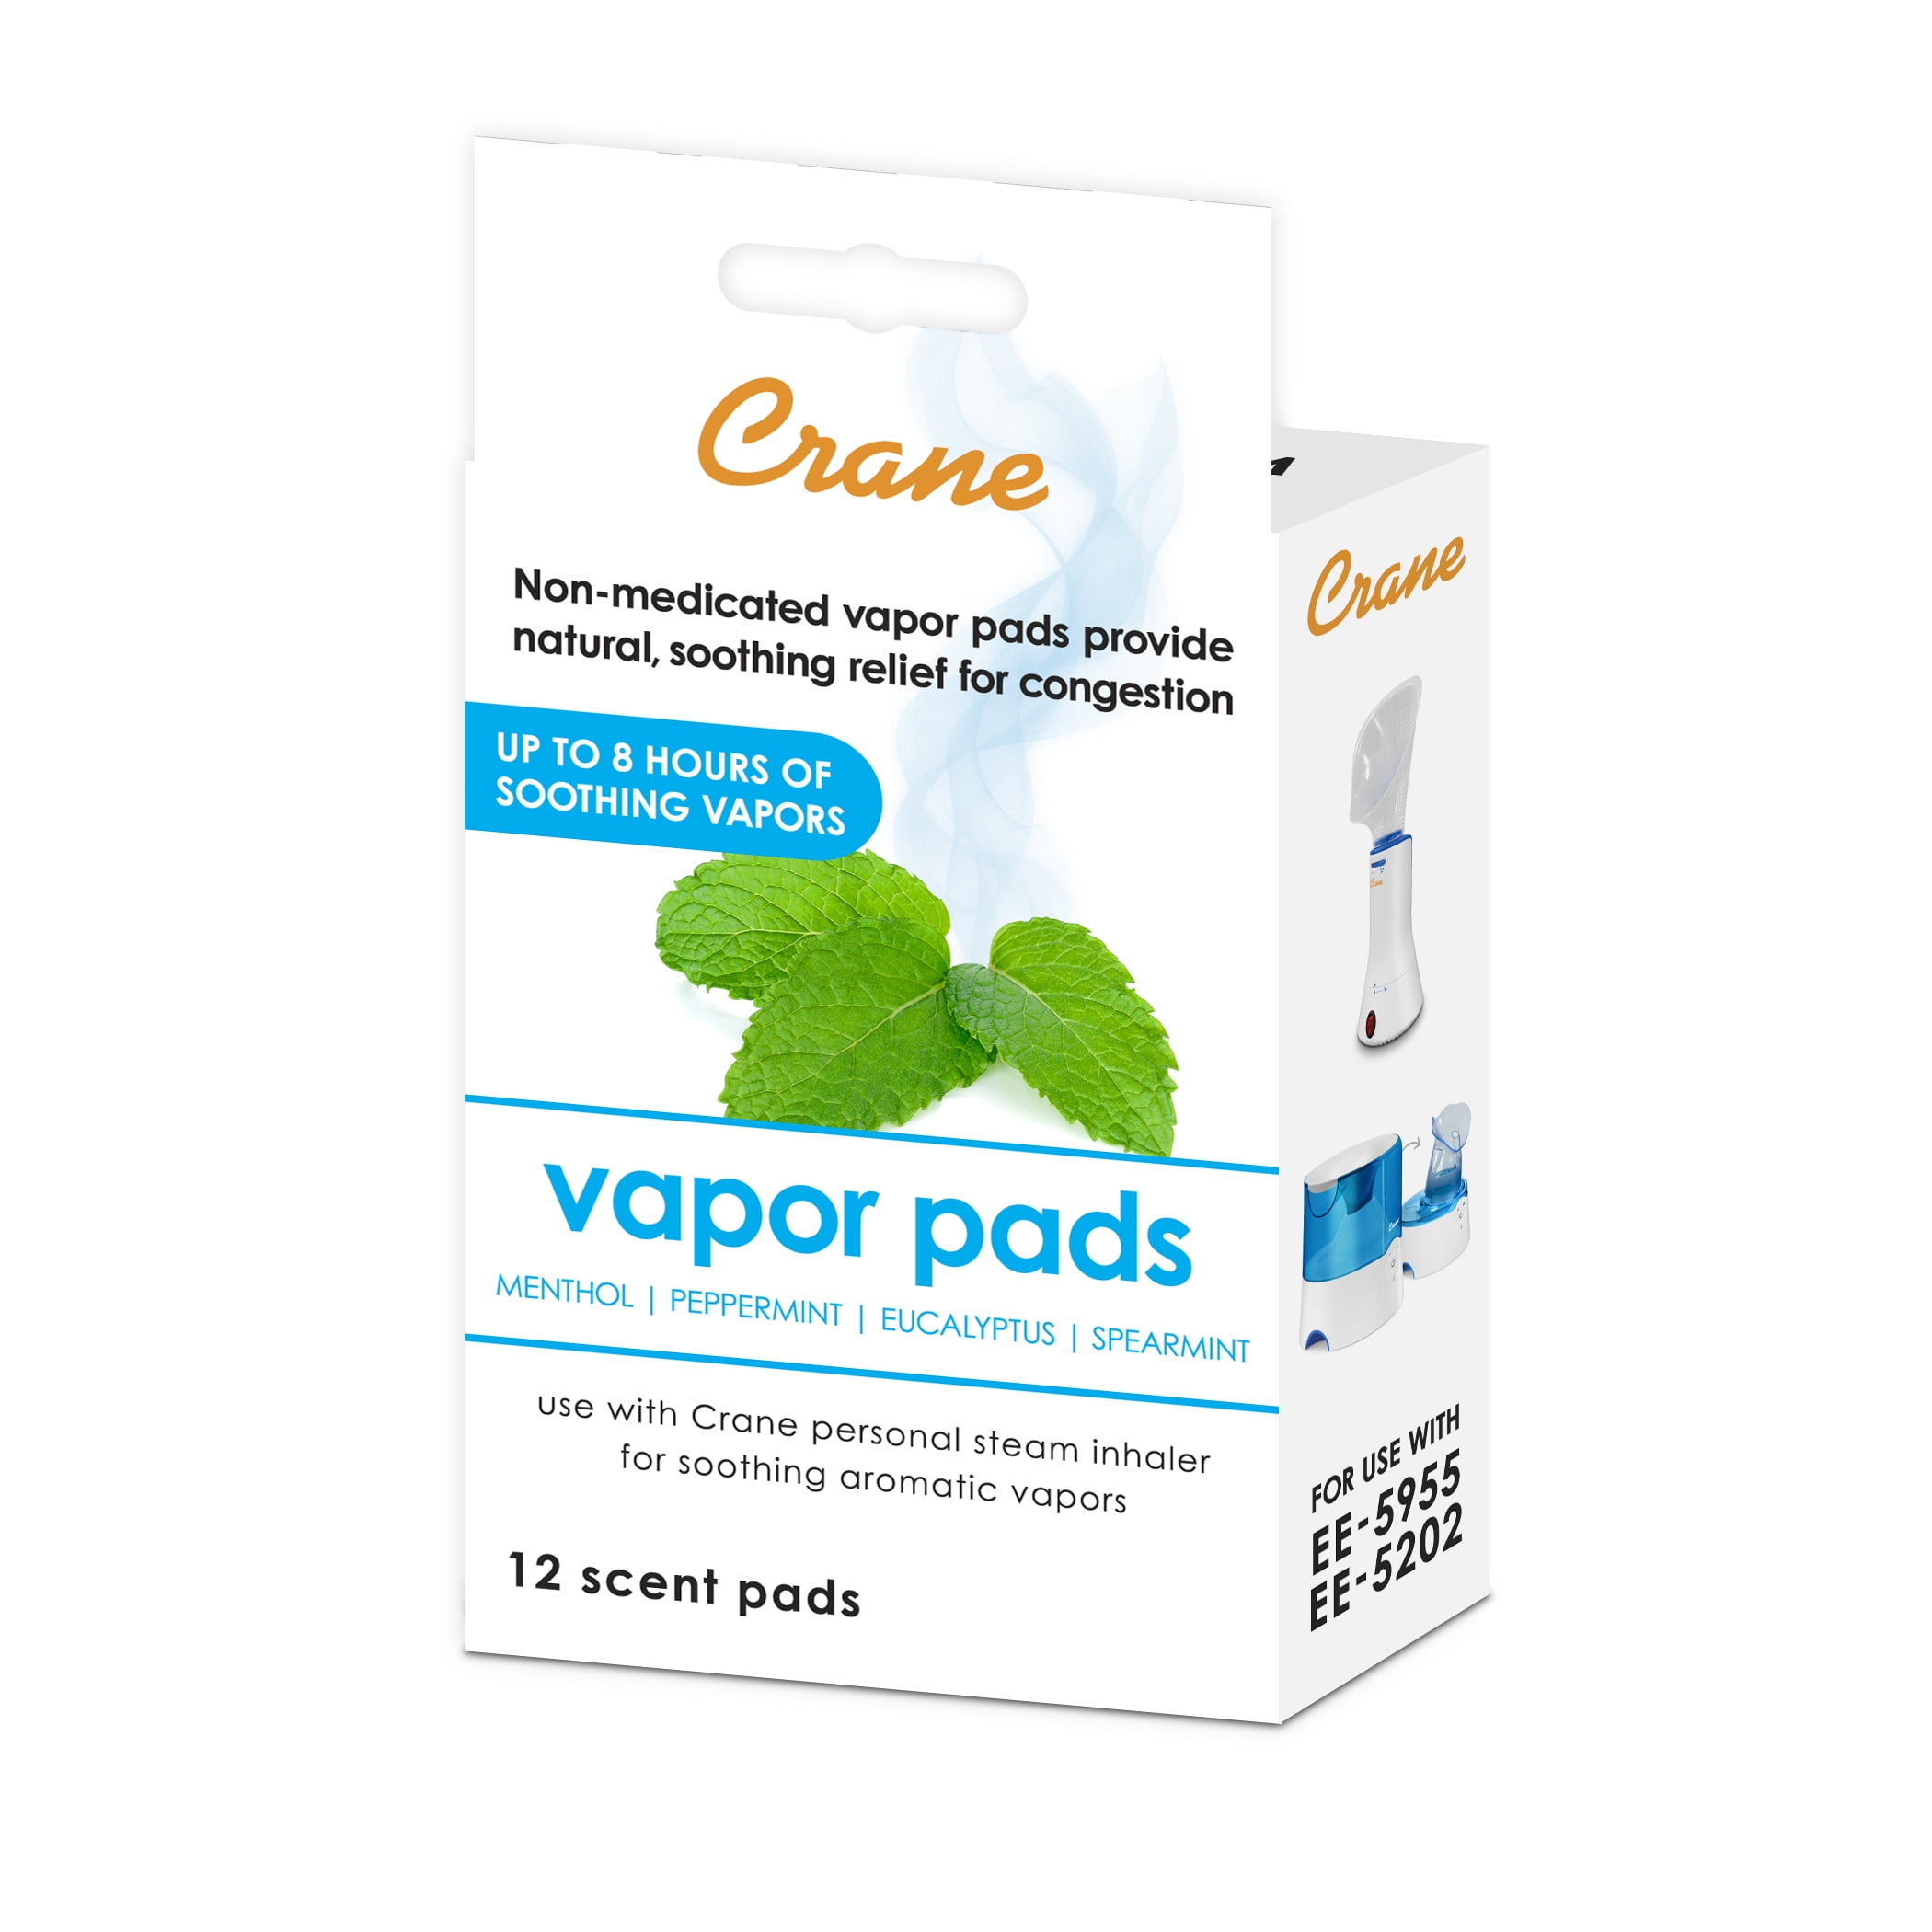 Menthol-Eucalyptus Universal Vapor Pads, for use with Droplets, Top Fill Drop, Corded Inhaler, Warm Mist Humidifiers, 12 Walmart.com